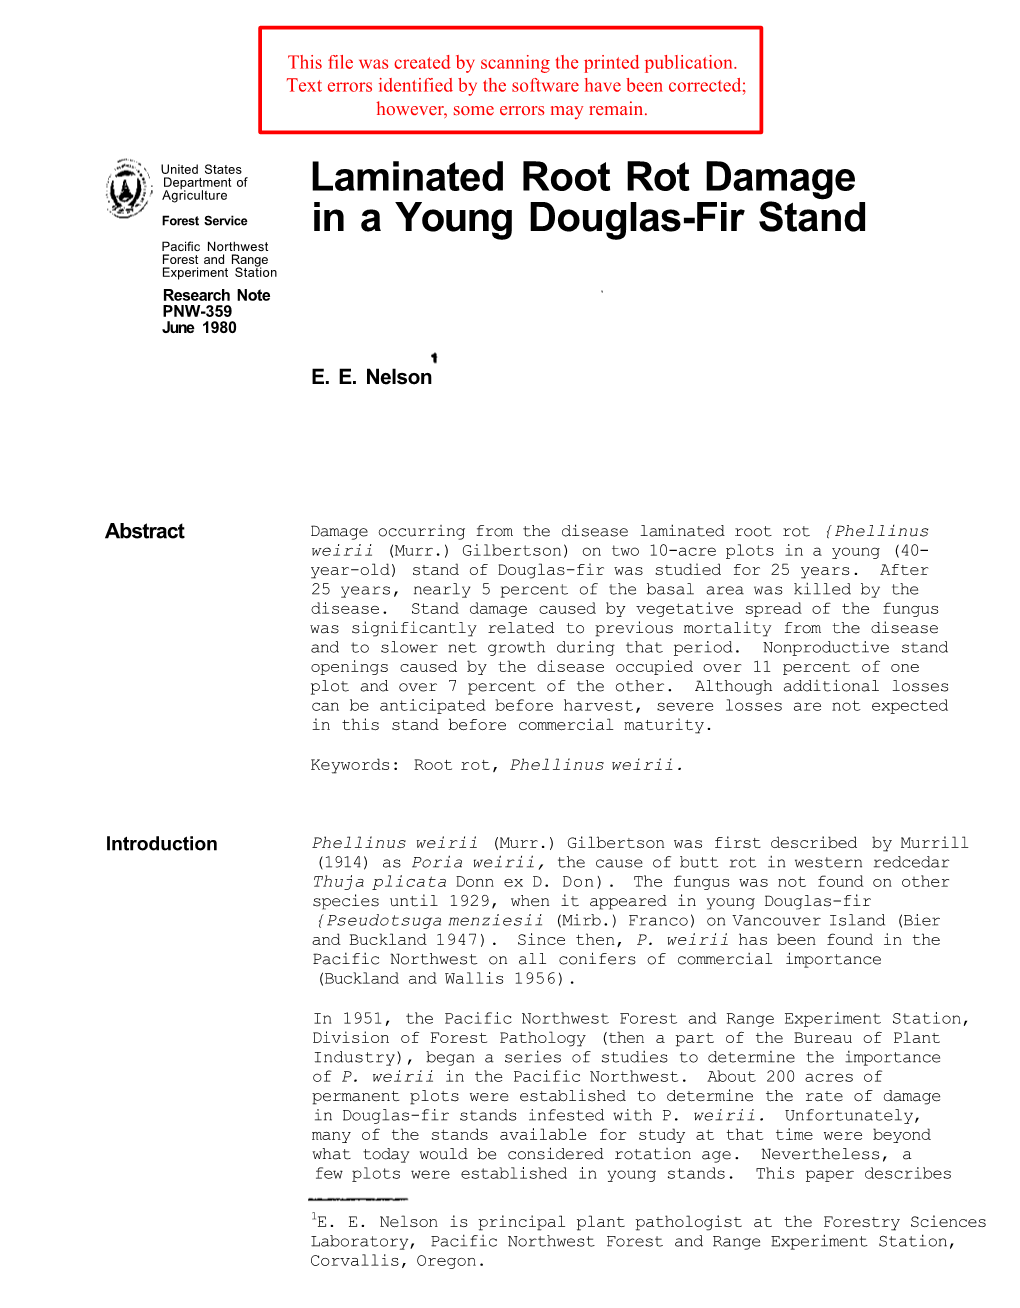 Laminated Root Rot Damage in a Young Douglas-Fir Stand